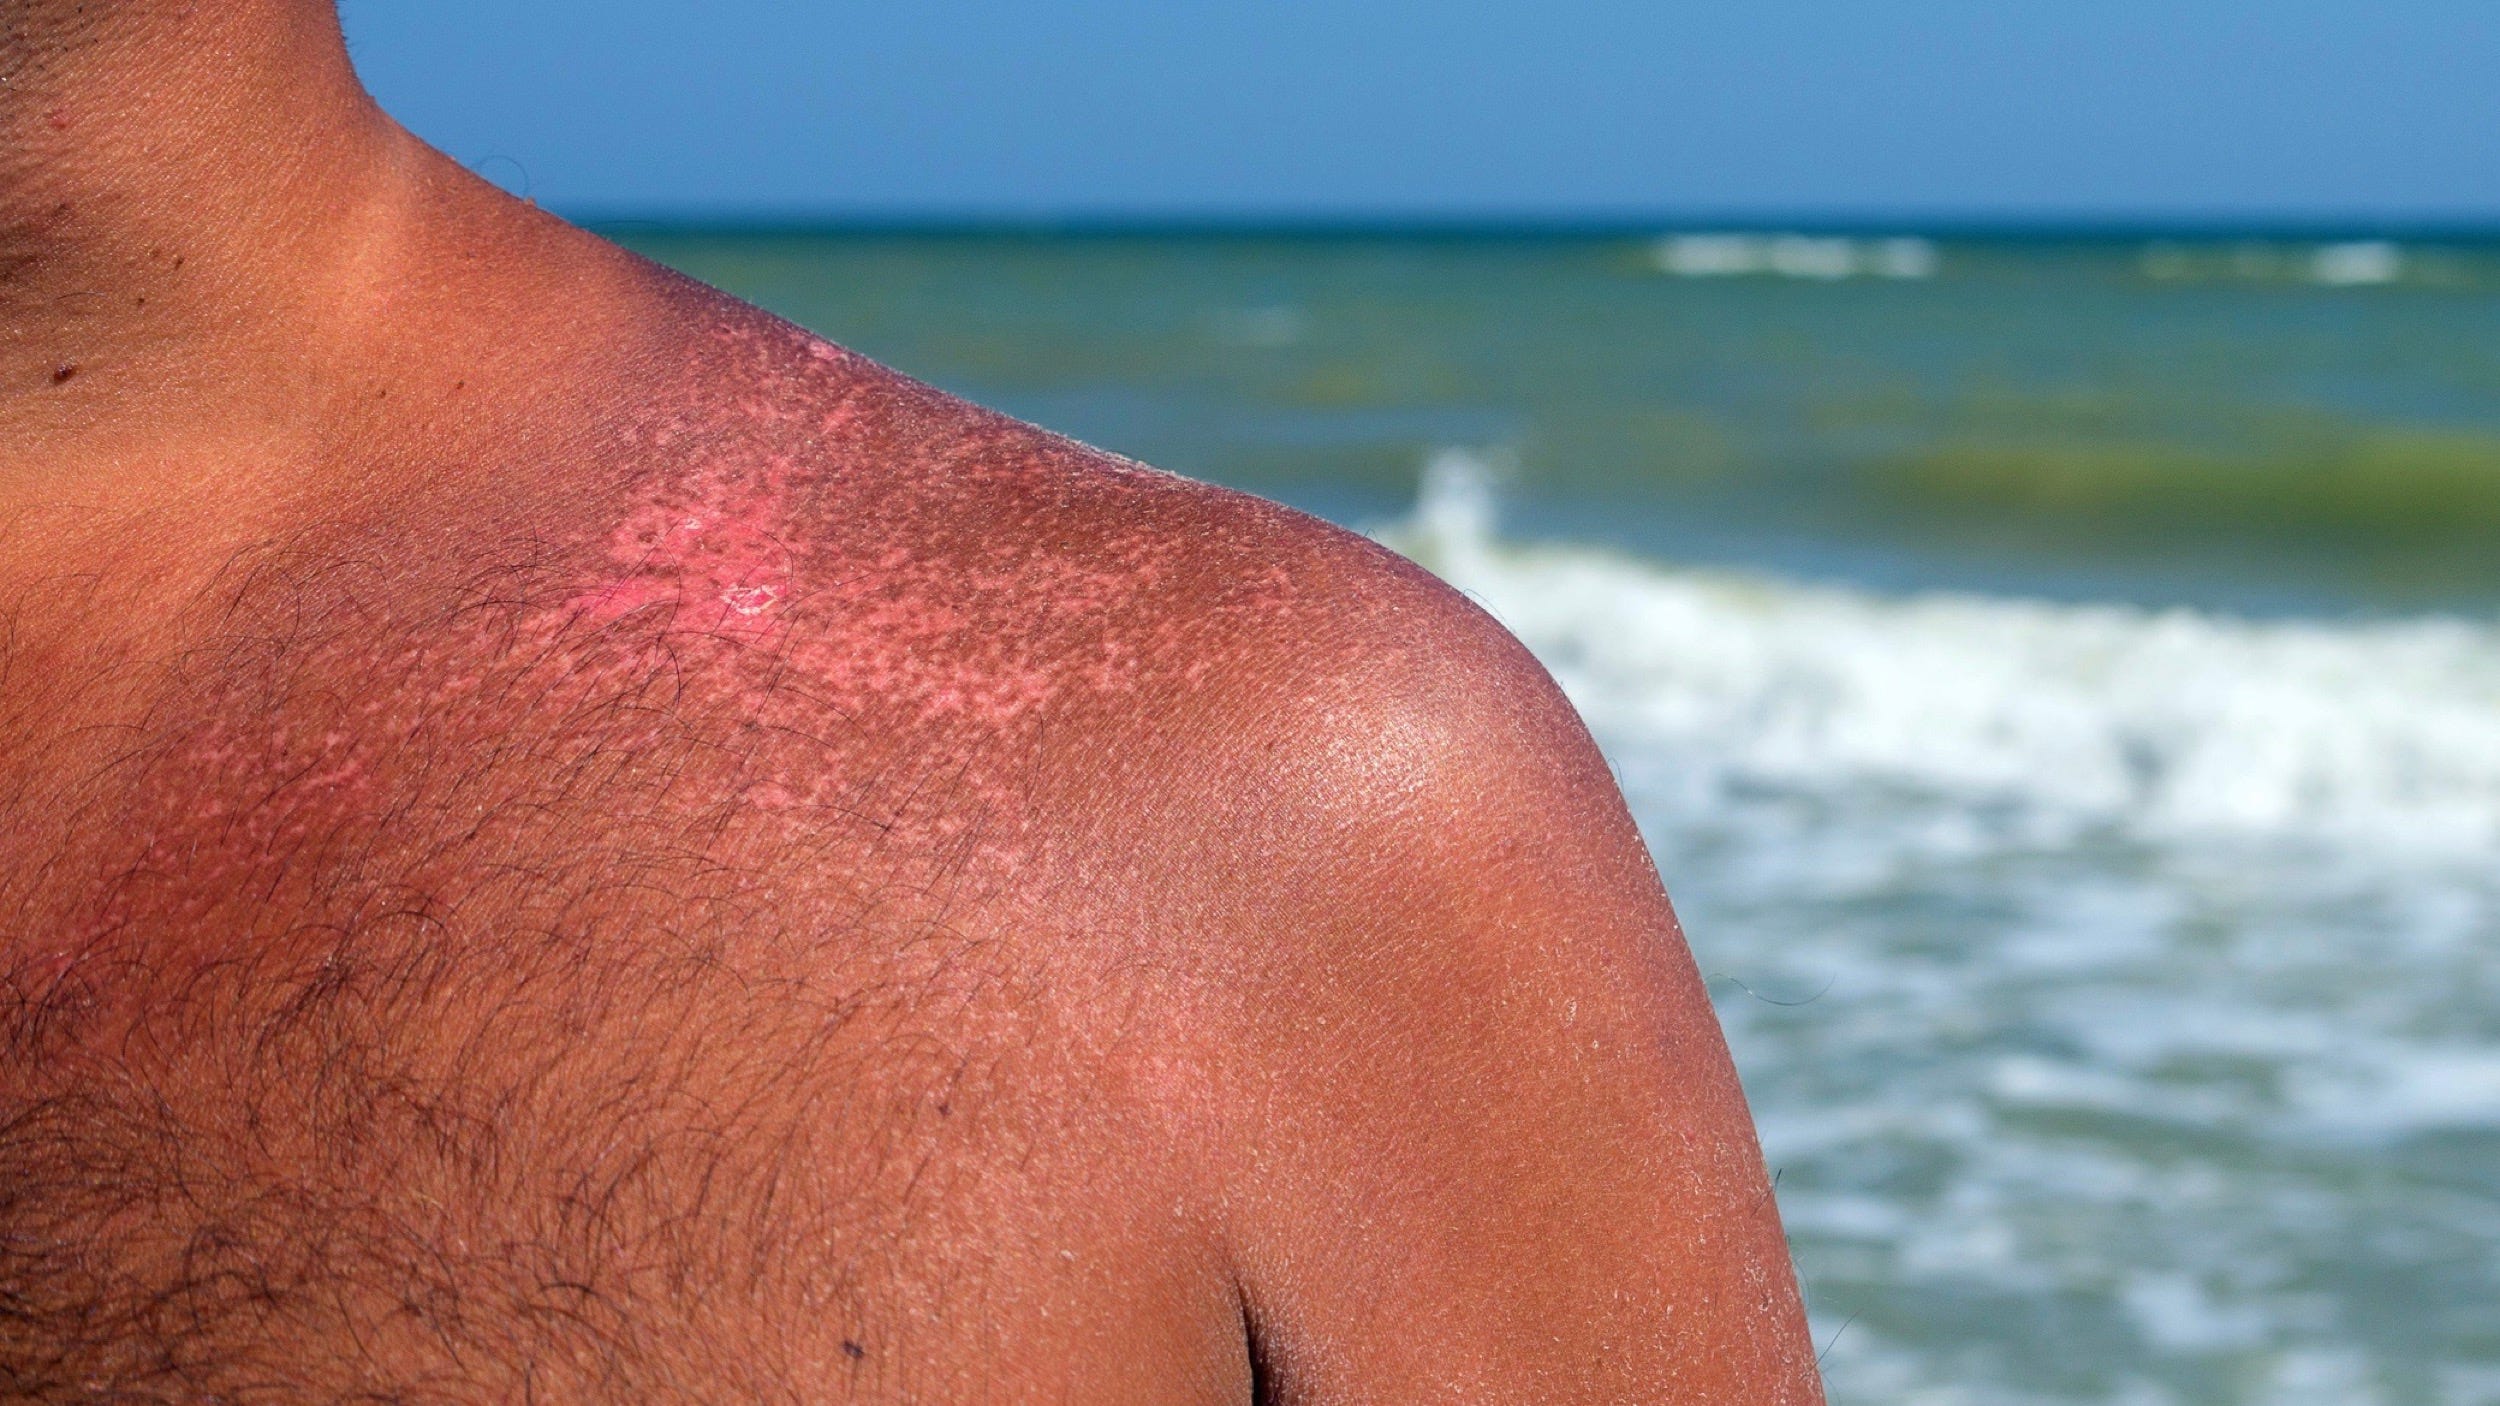 How To Get Rid Of A Sunburn Fast Using Easy At Home Remedies